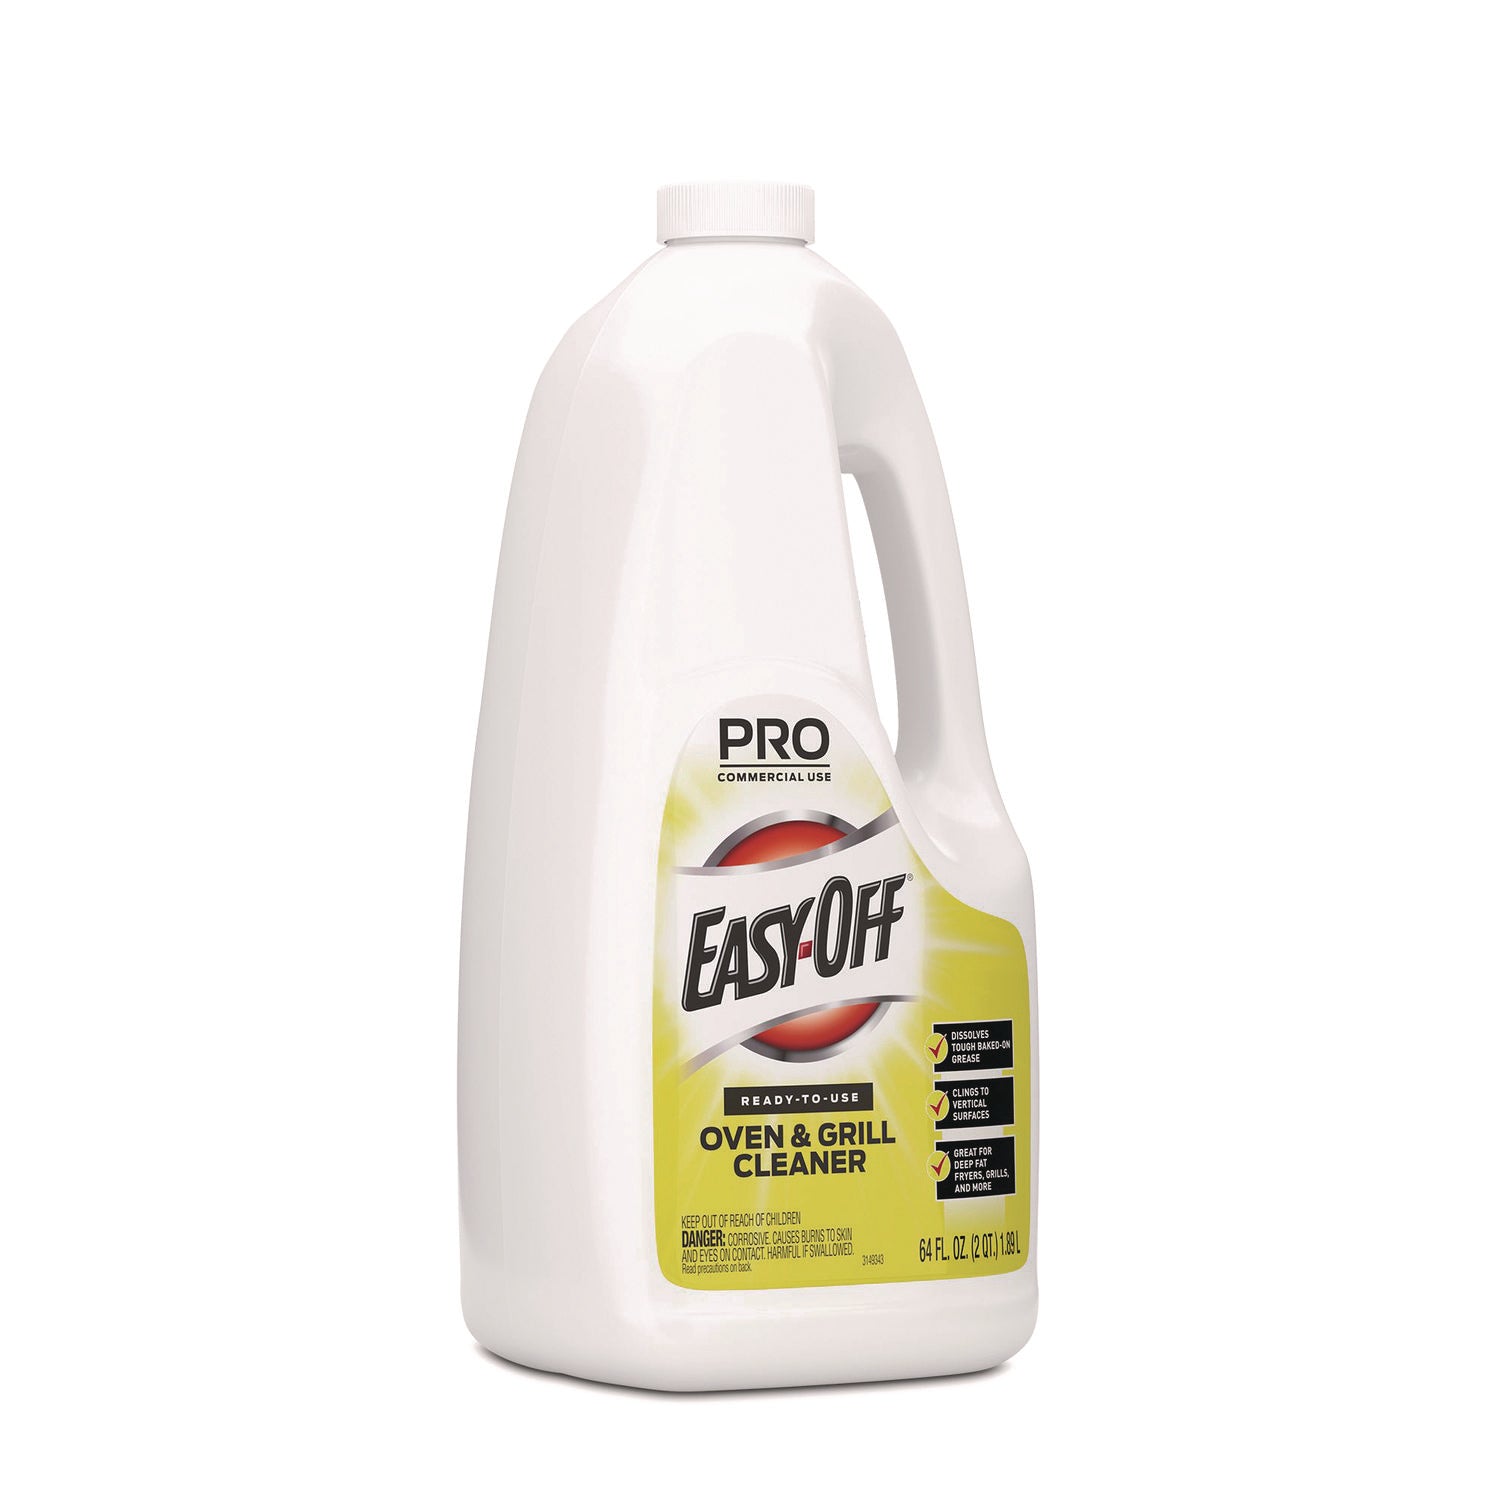 ready-to-use-oven-and-grill-cleaner-liquid-2-qt-bottle-6-carton_rac80689ct - 3